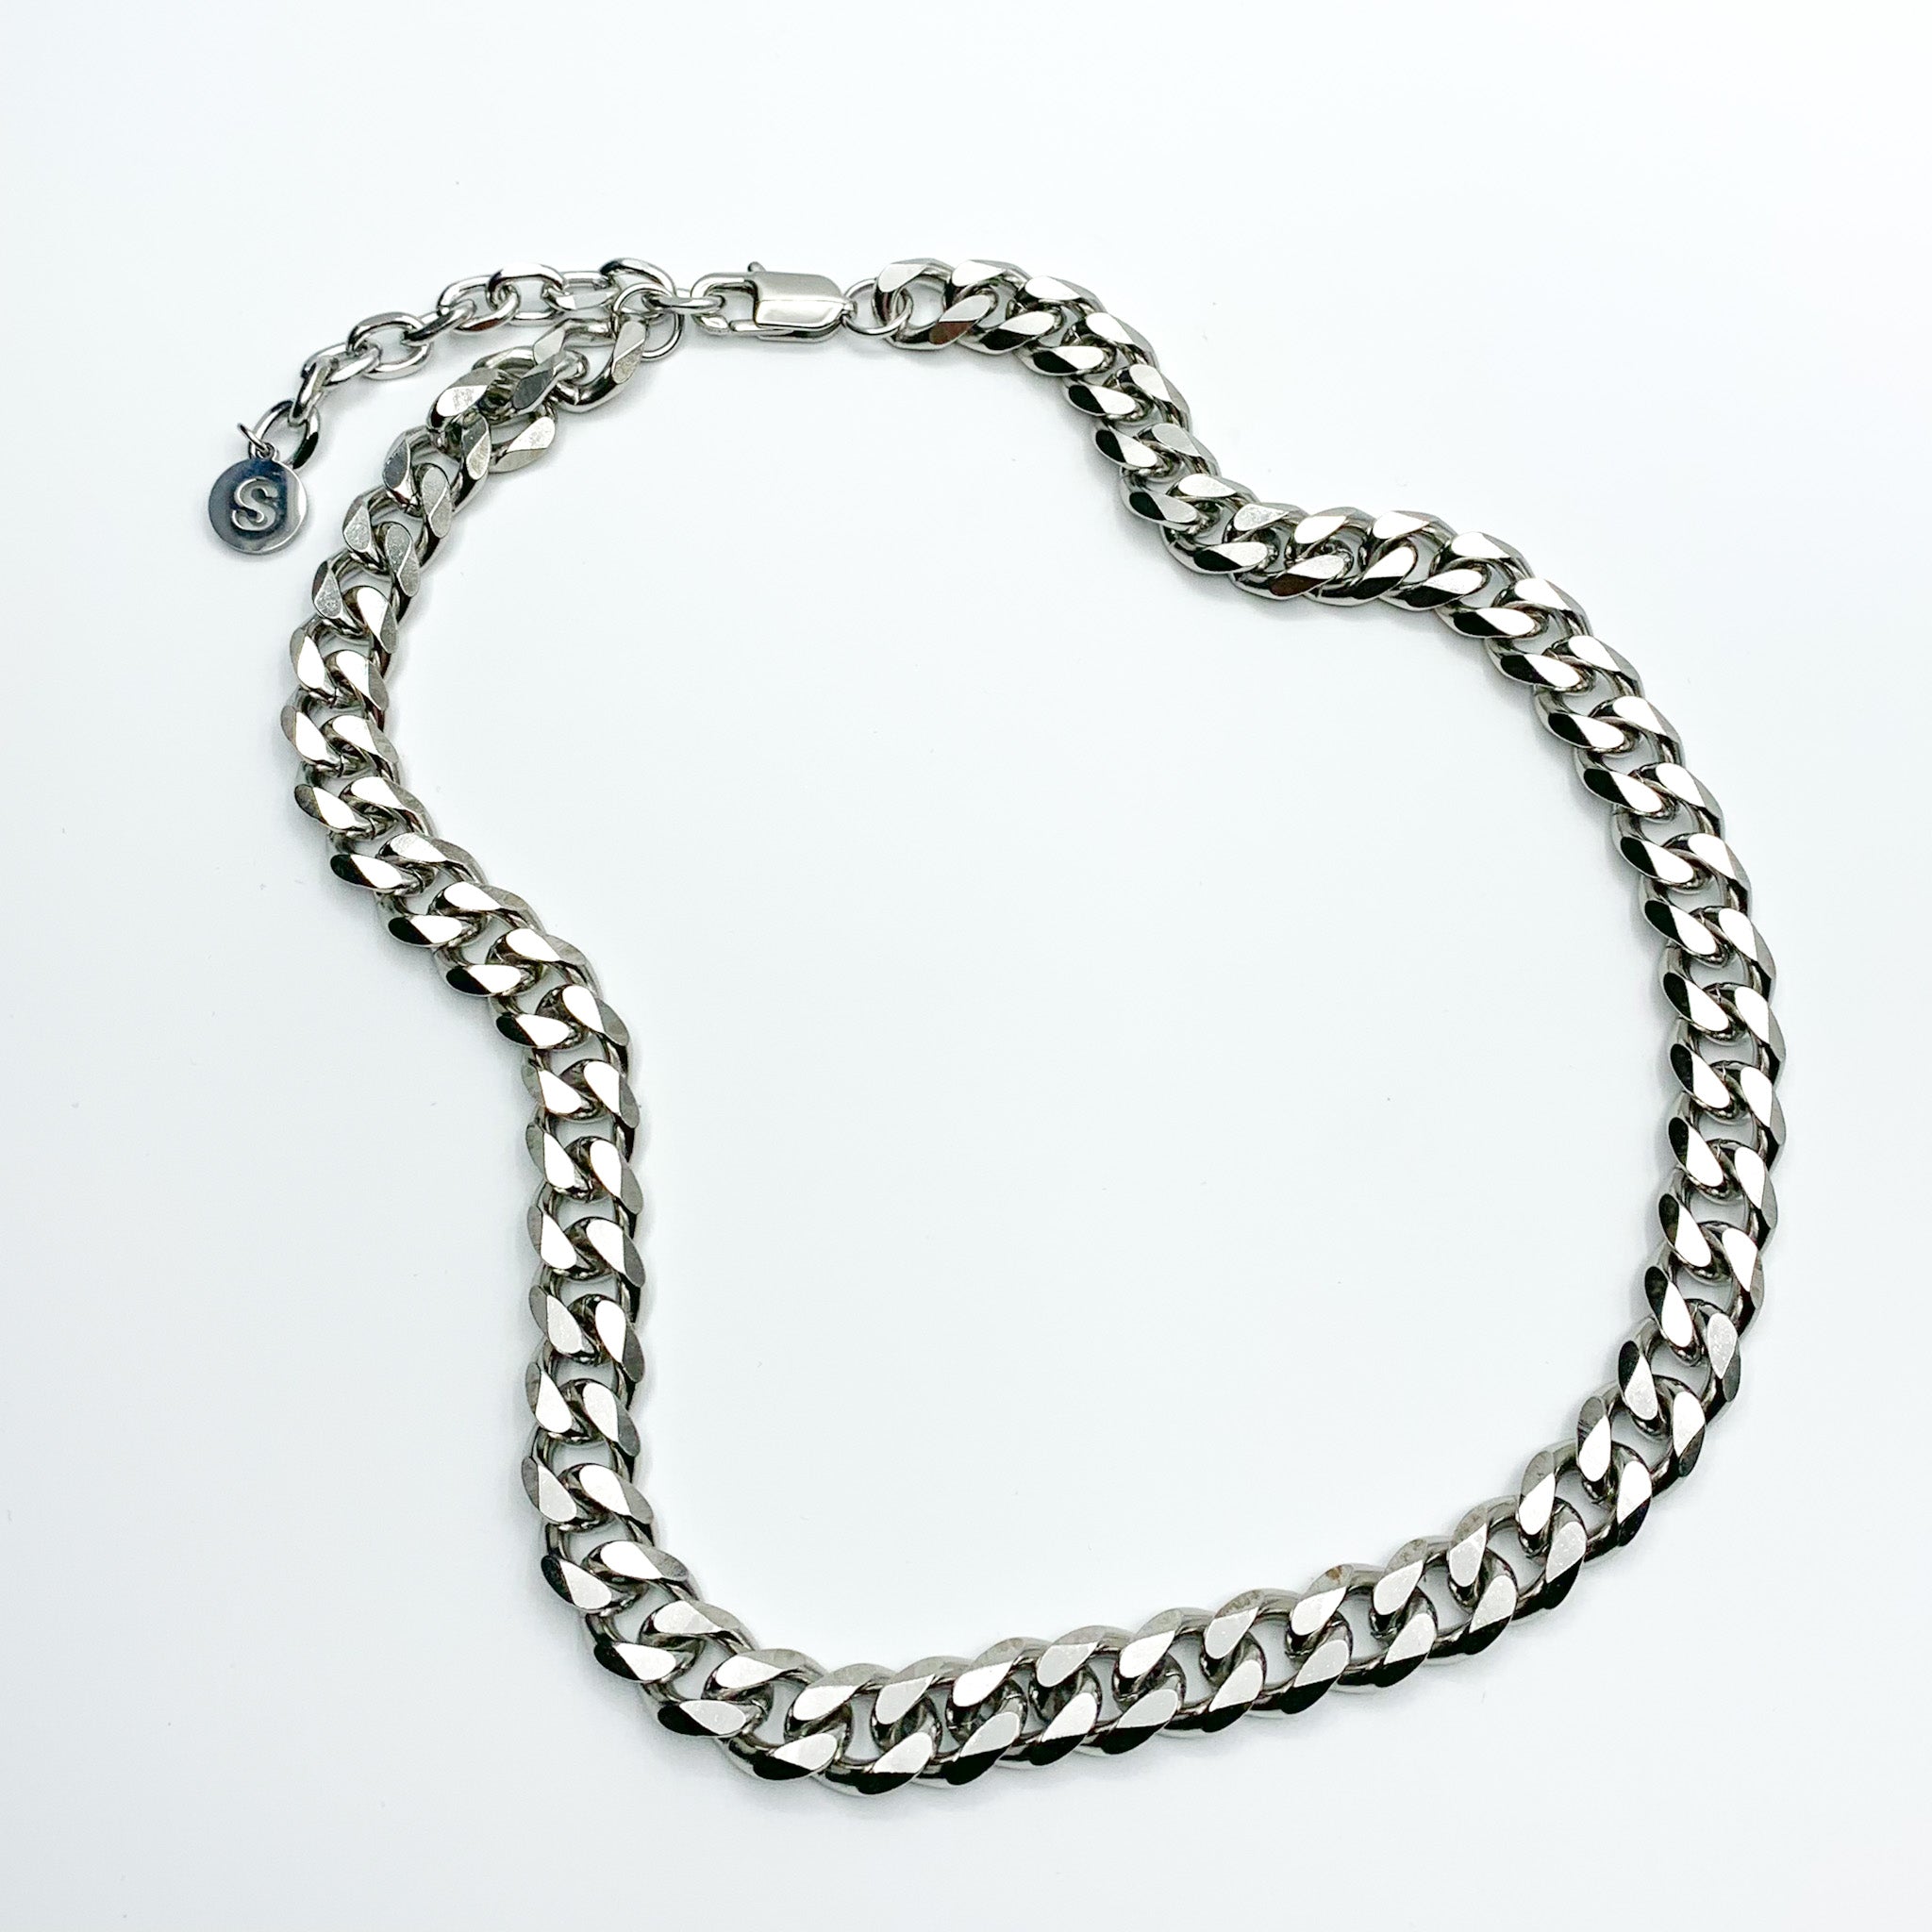 Upgrade your style with The Cuban Link 3.0 Chain, an enhanced version of our renowned Cuban Link Chain. Crafted from High-Quality Stainless Steel, this waterproof necklace ensures durability and style. Featuring an adjustable length varying up to 5cm for a customized fit, it's the perfect year-round accessory with a link width of 11cm.